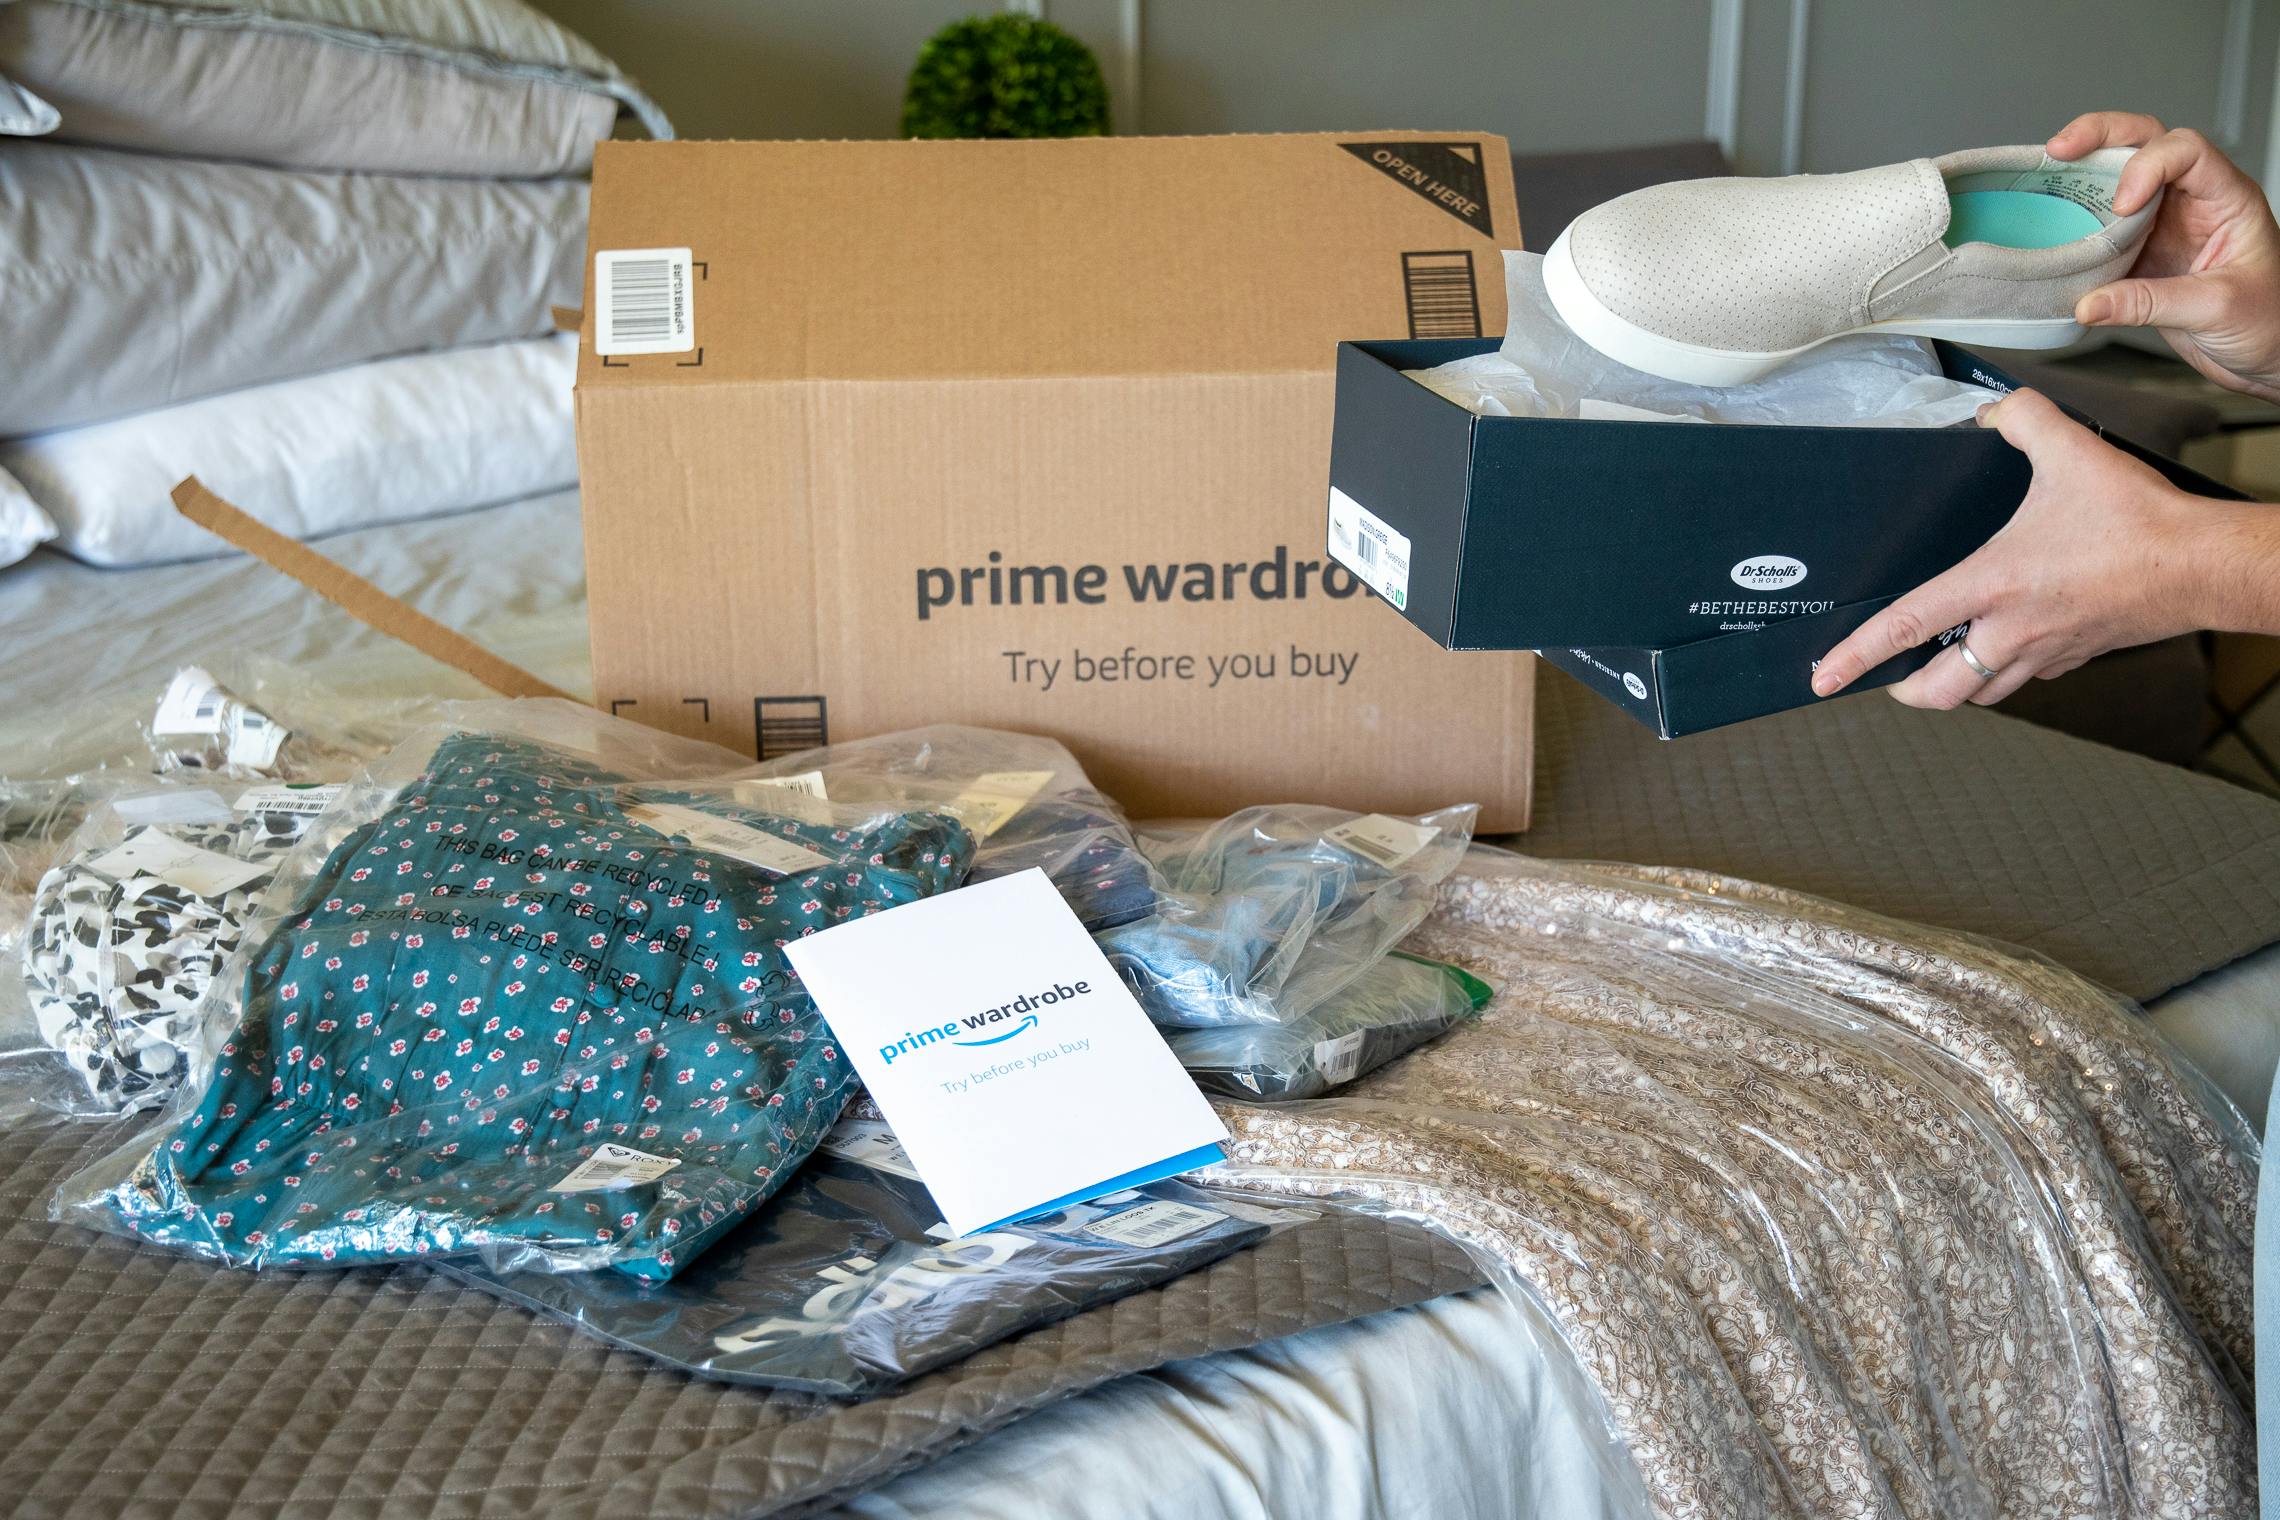 A woman looking at a pair of shoes ordered from Amazon Prime wardrobe with items from an order box in the background. 